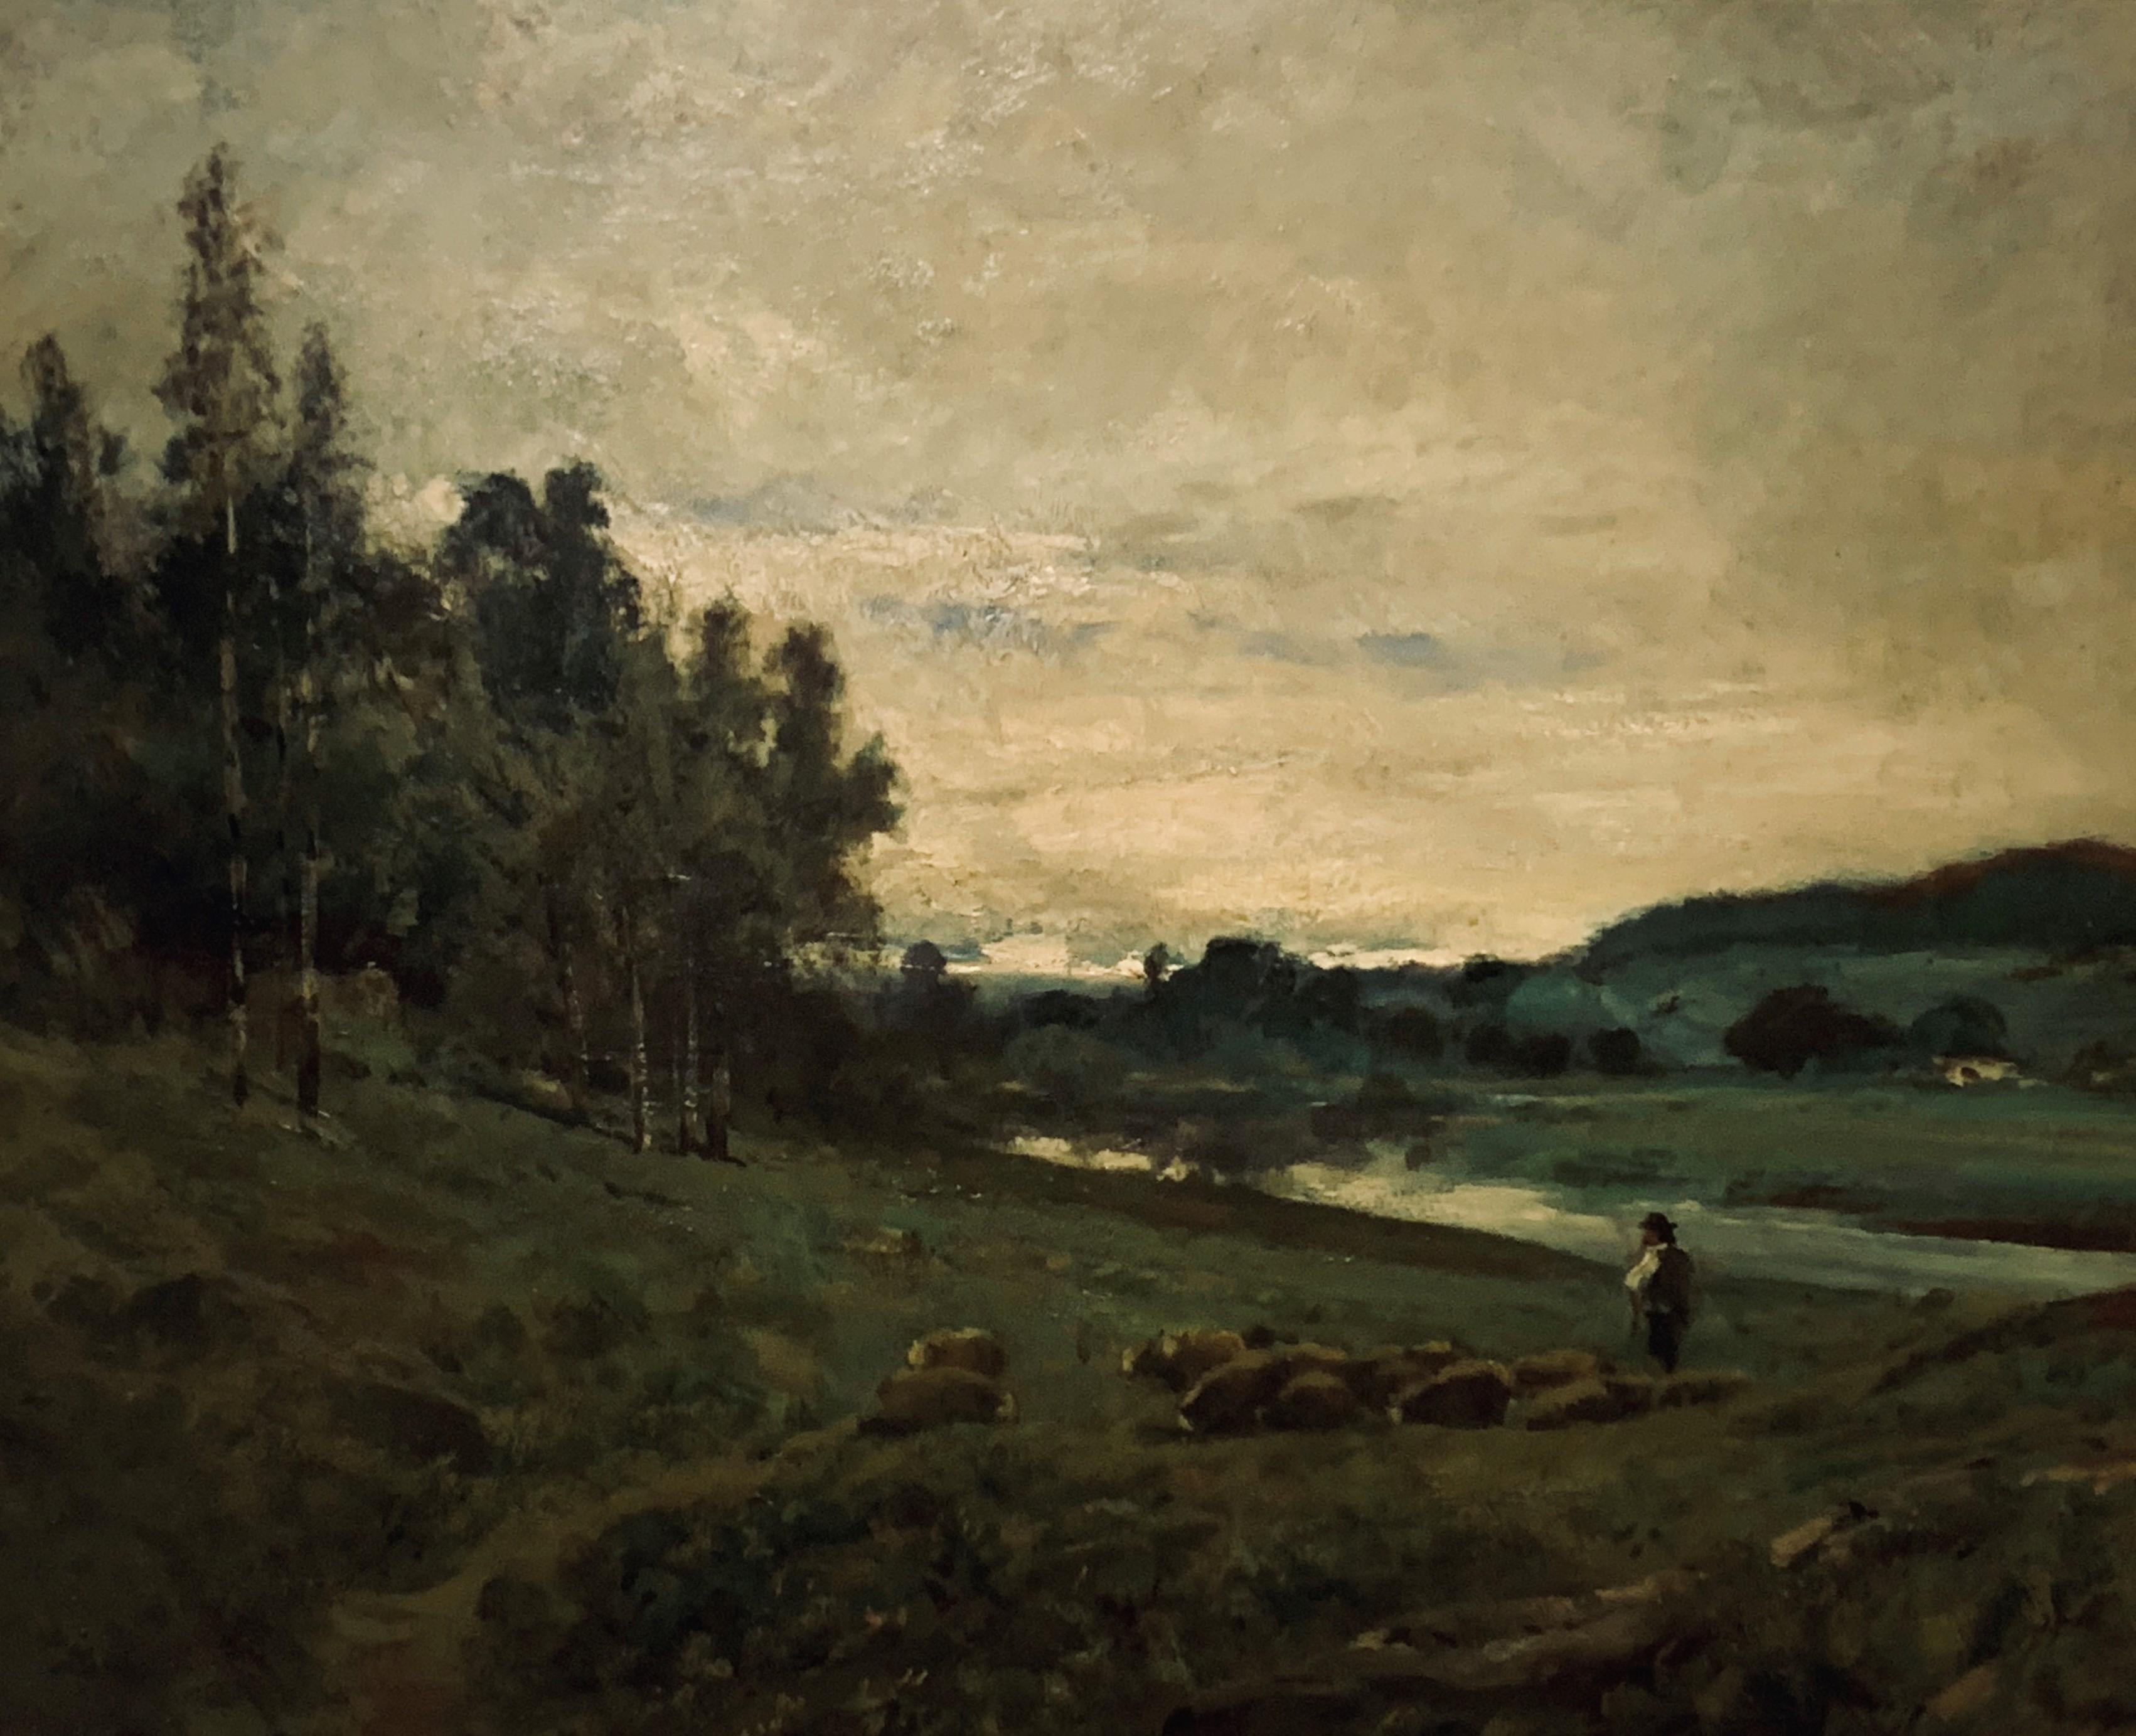 American Barbizon Landscape, New England about 1890  Shepherd and Sheep  - Painting by Unknown